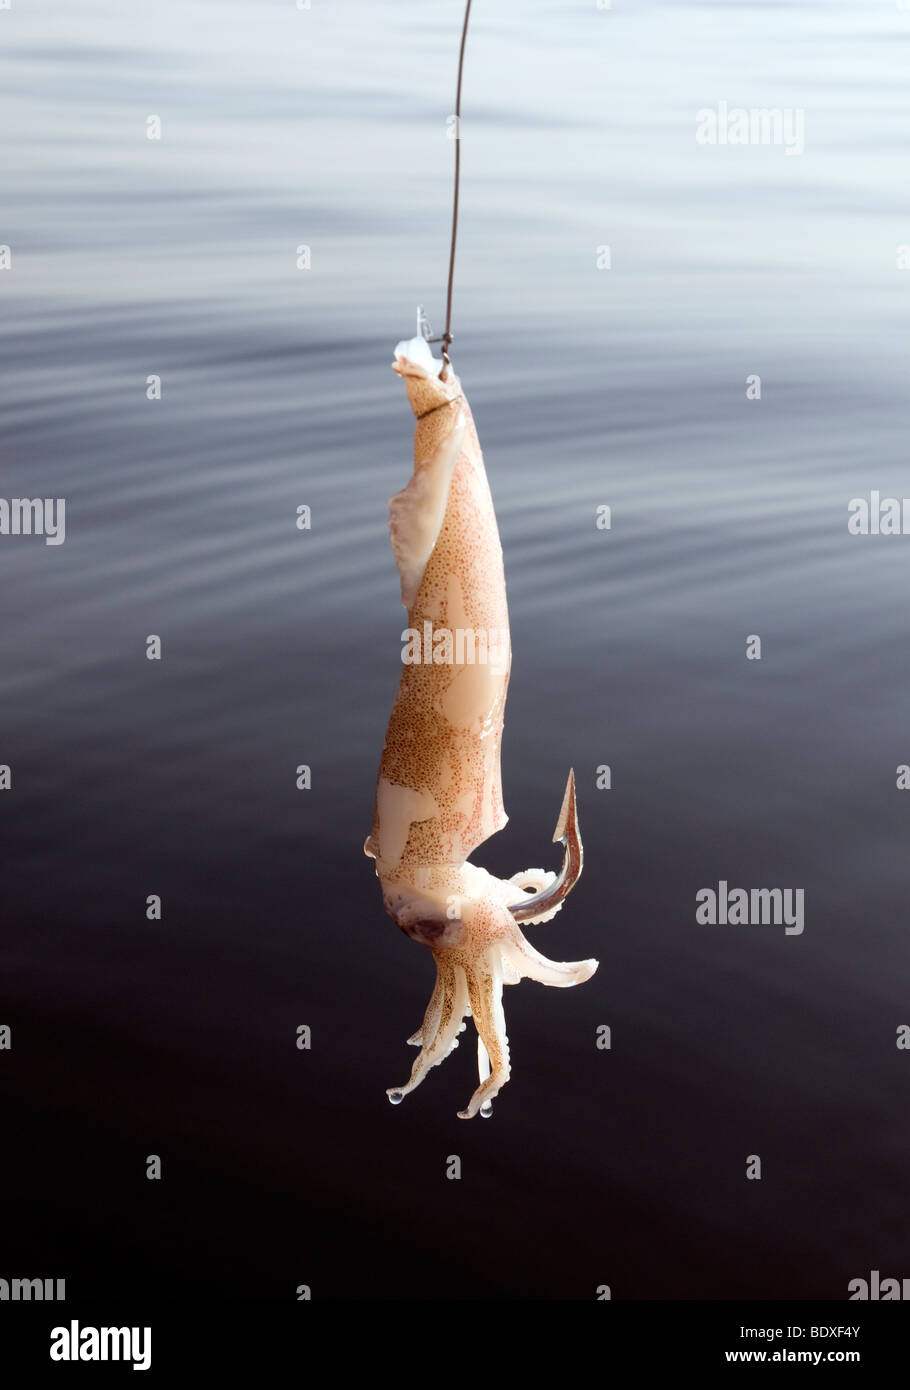 https://c8.alamy.com/comp/BDXF4Y/a-dead-squid-threaded-through-a-large-fish-hook-becomes-ideal-shark-BDXF4Y.jpg